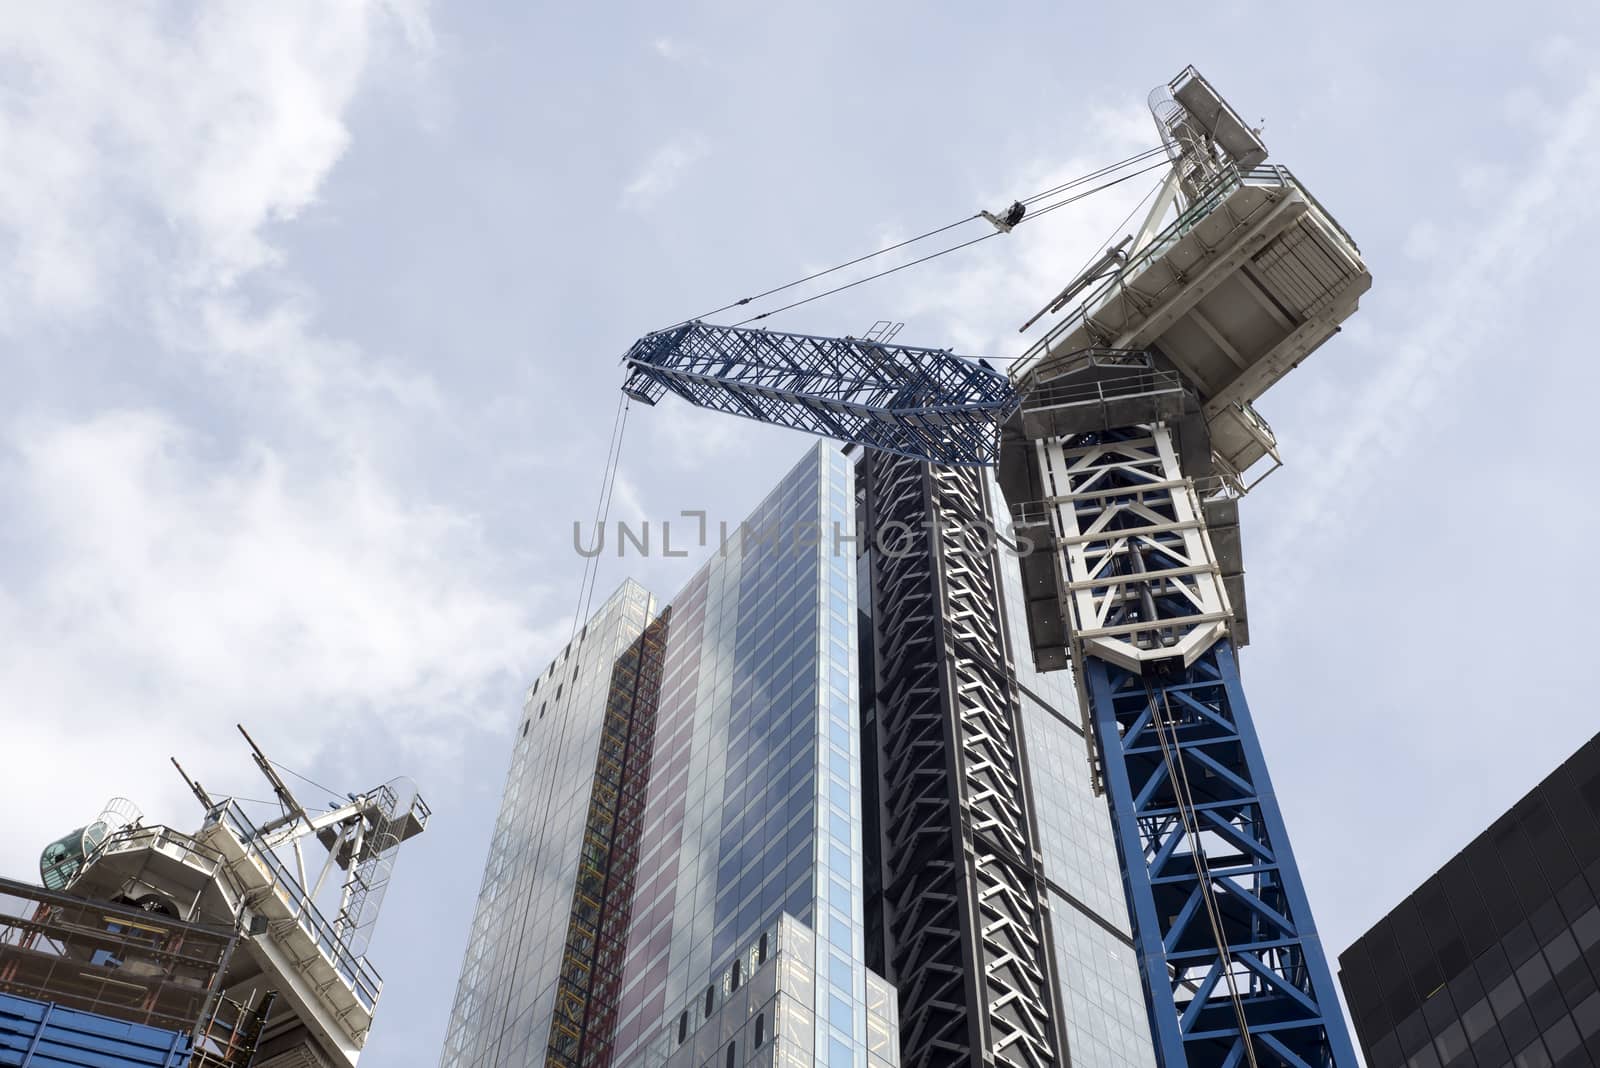 london city skyscraper with a crane by morrbyte